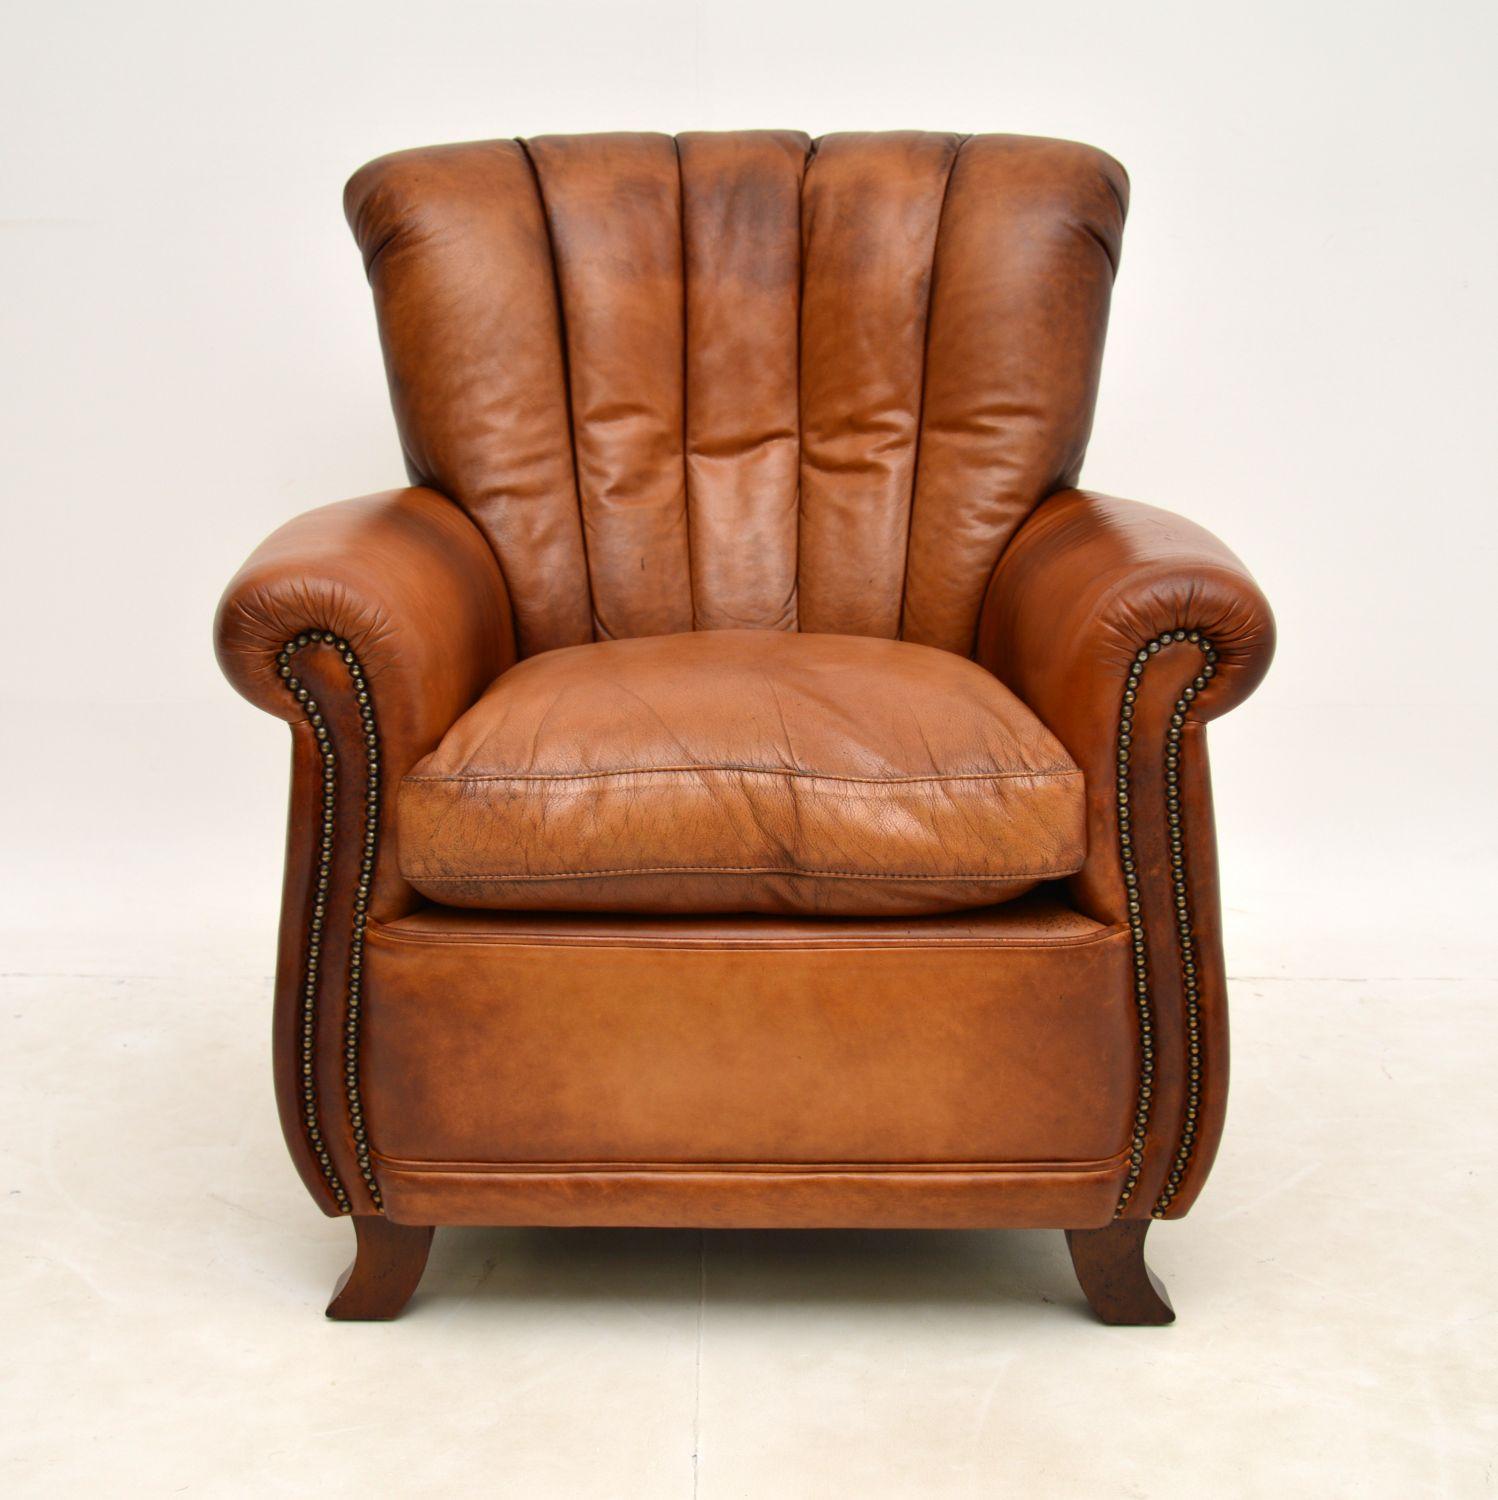 A smart and extremely comfortable vintage leather armchair, in the antique French style, which we would date from around the 1960’s period.

The quality is excellent, this is very well made and upholstered in beautiful brown leather. It has a